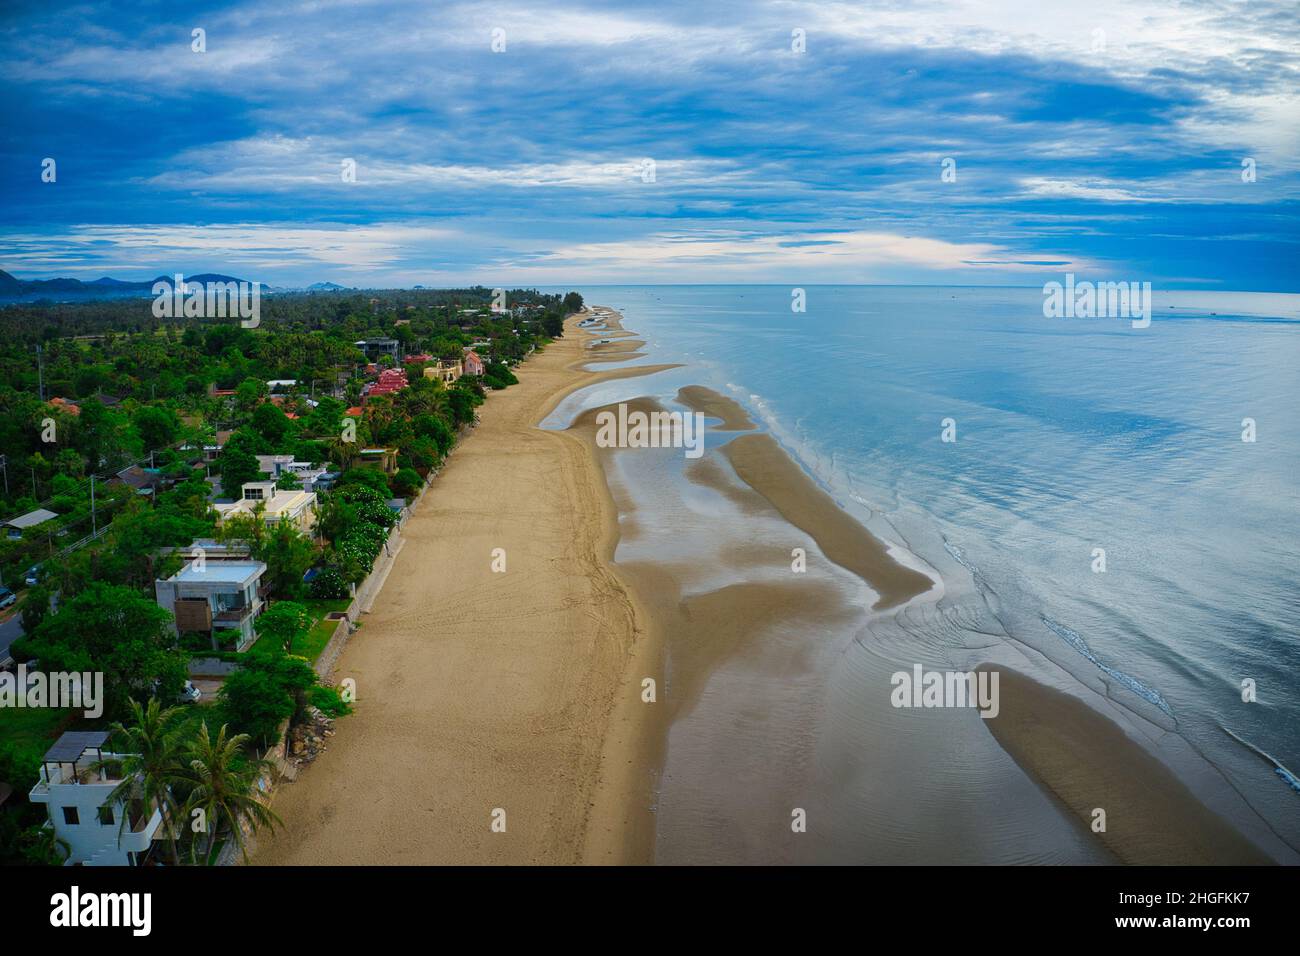 The beautiful beach of Pak Nam Pran In Thailand, photographed with a drone from above at low tide and on a cloudy day! Stock Photo